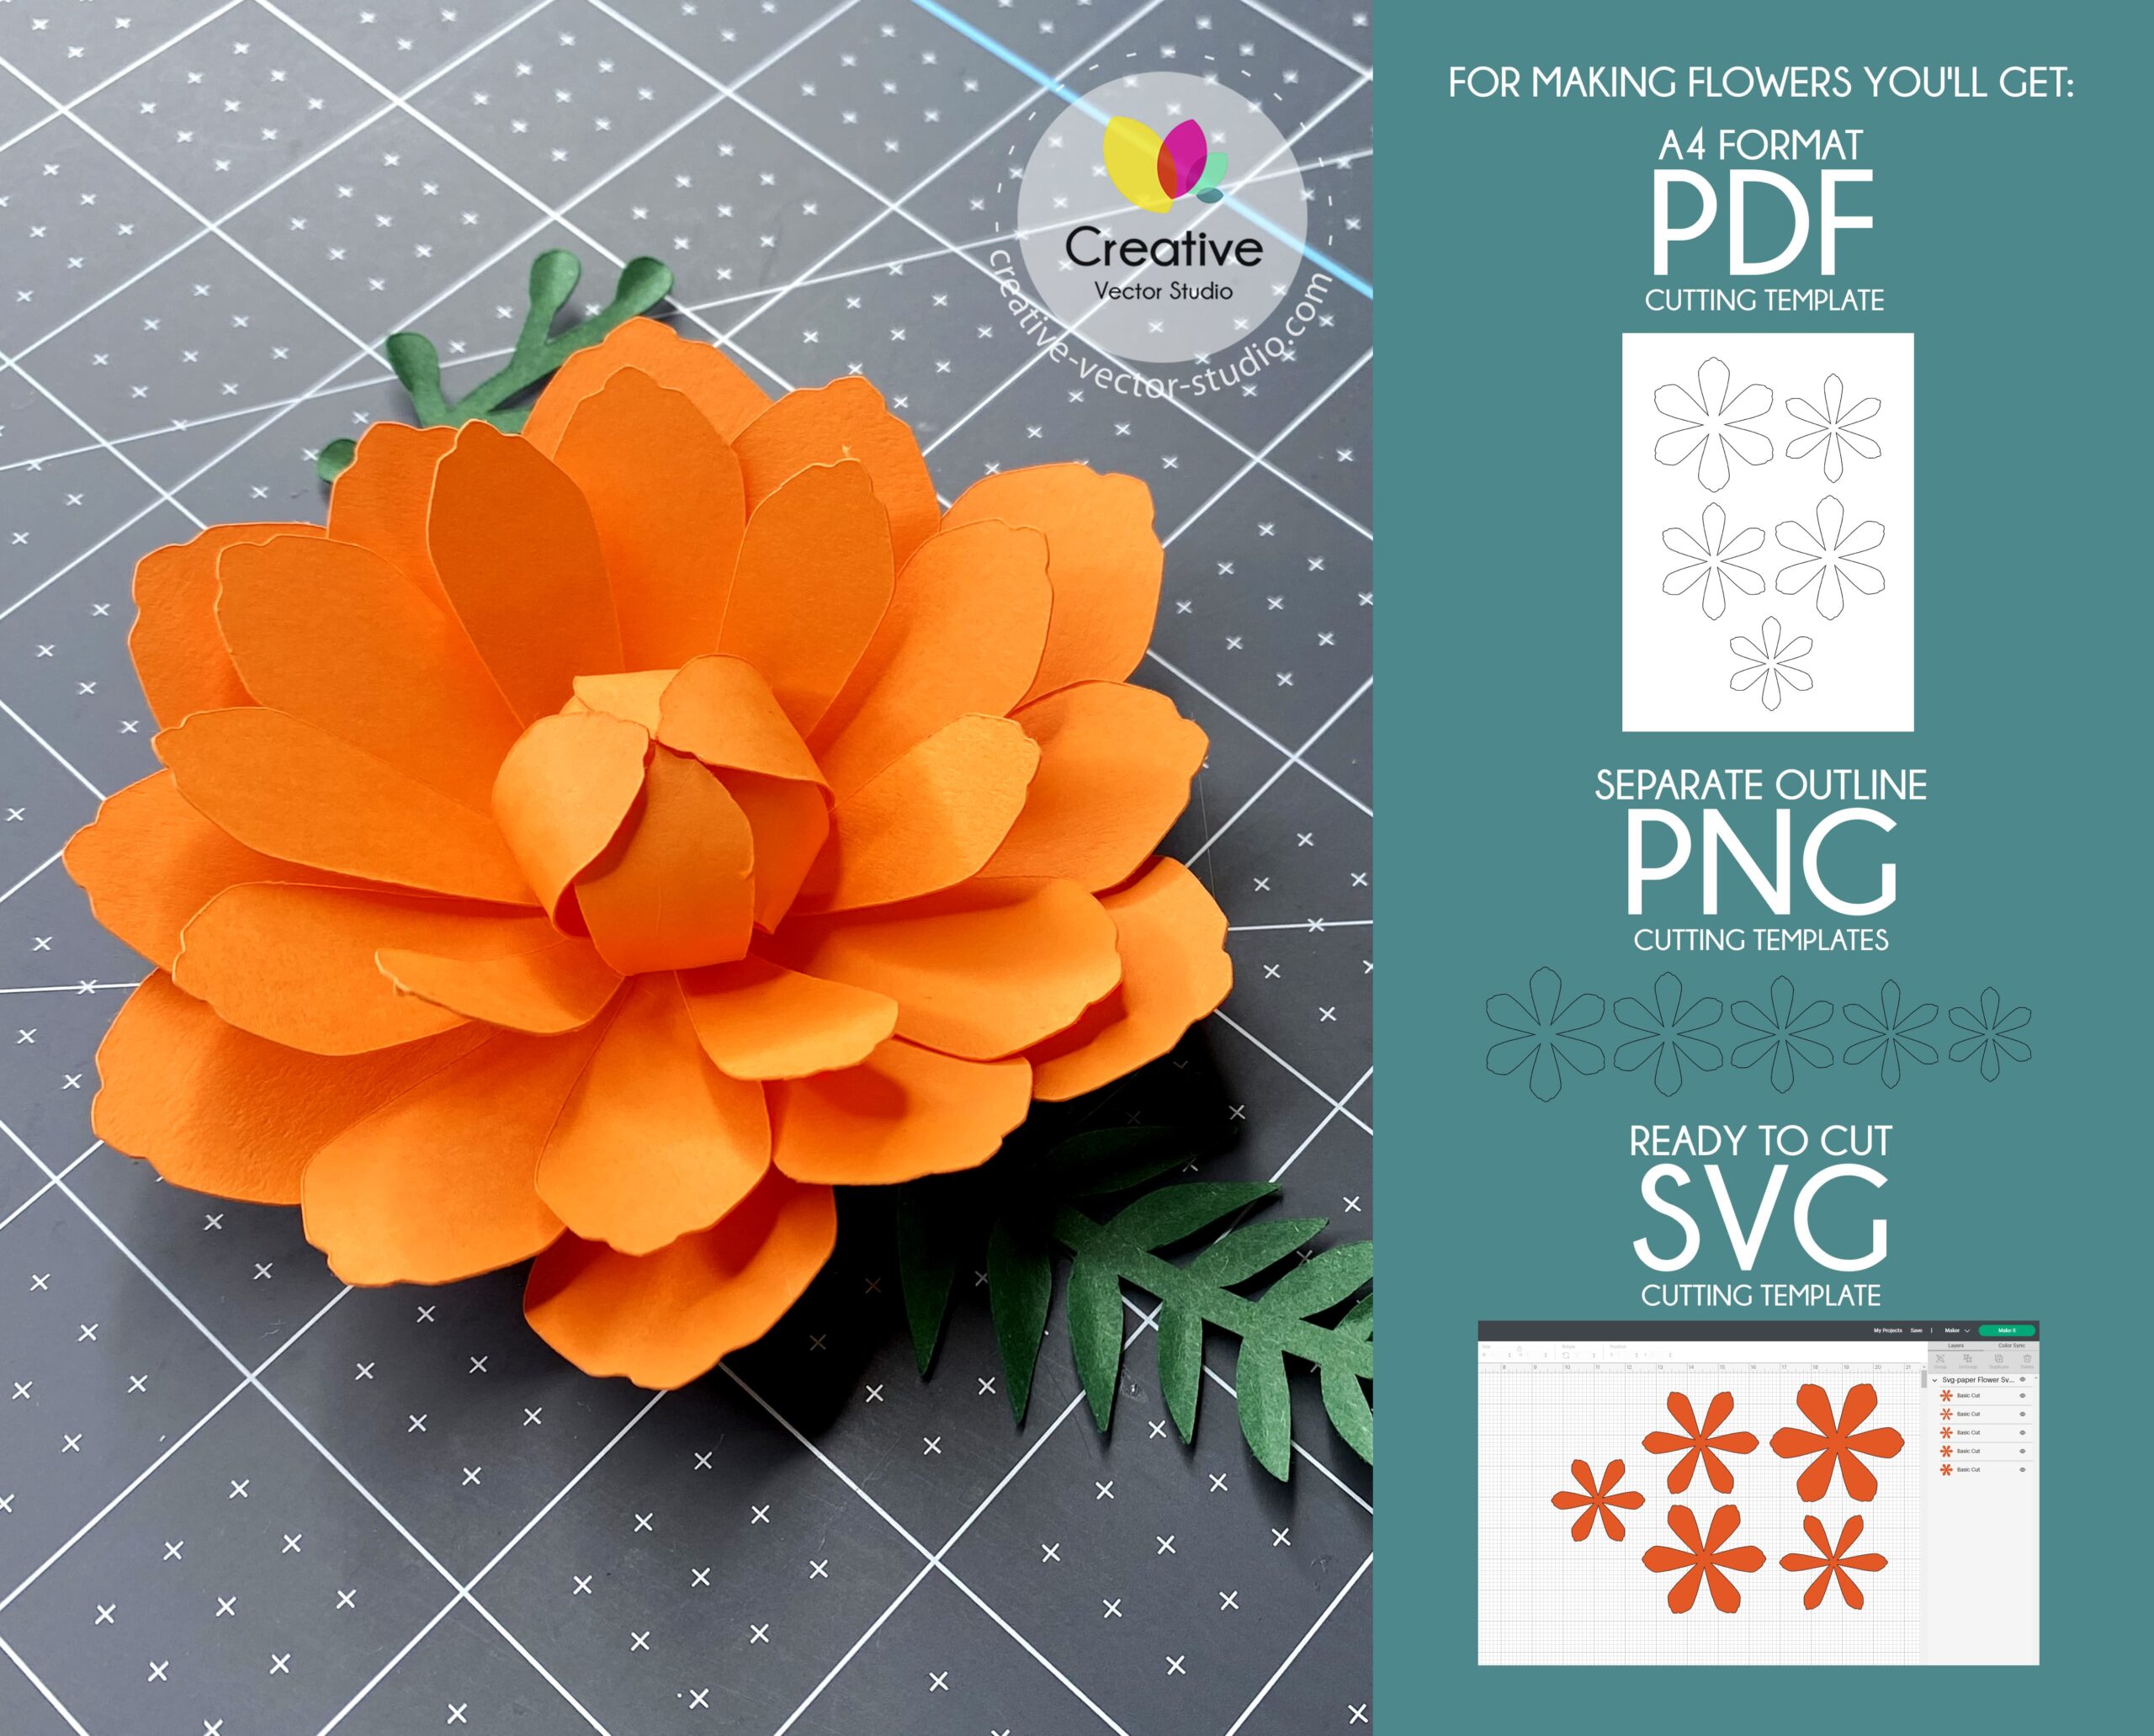 Free paper flower templates, PDF, SVG, PNG files, with super easy tutorial